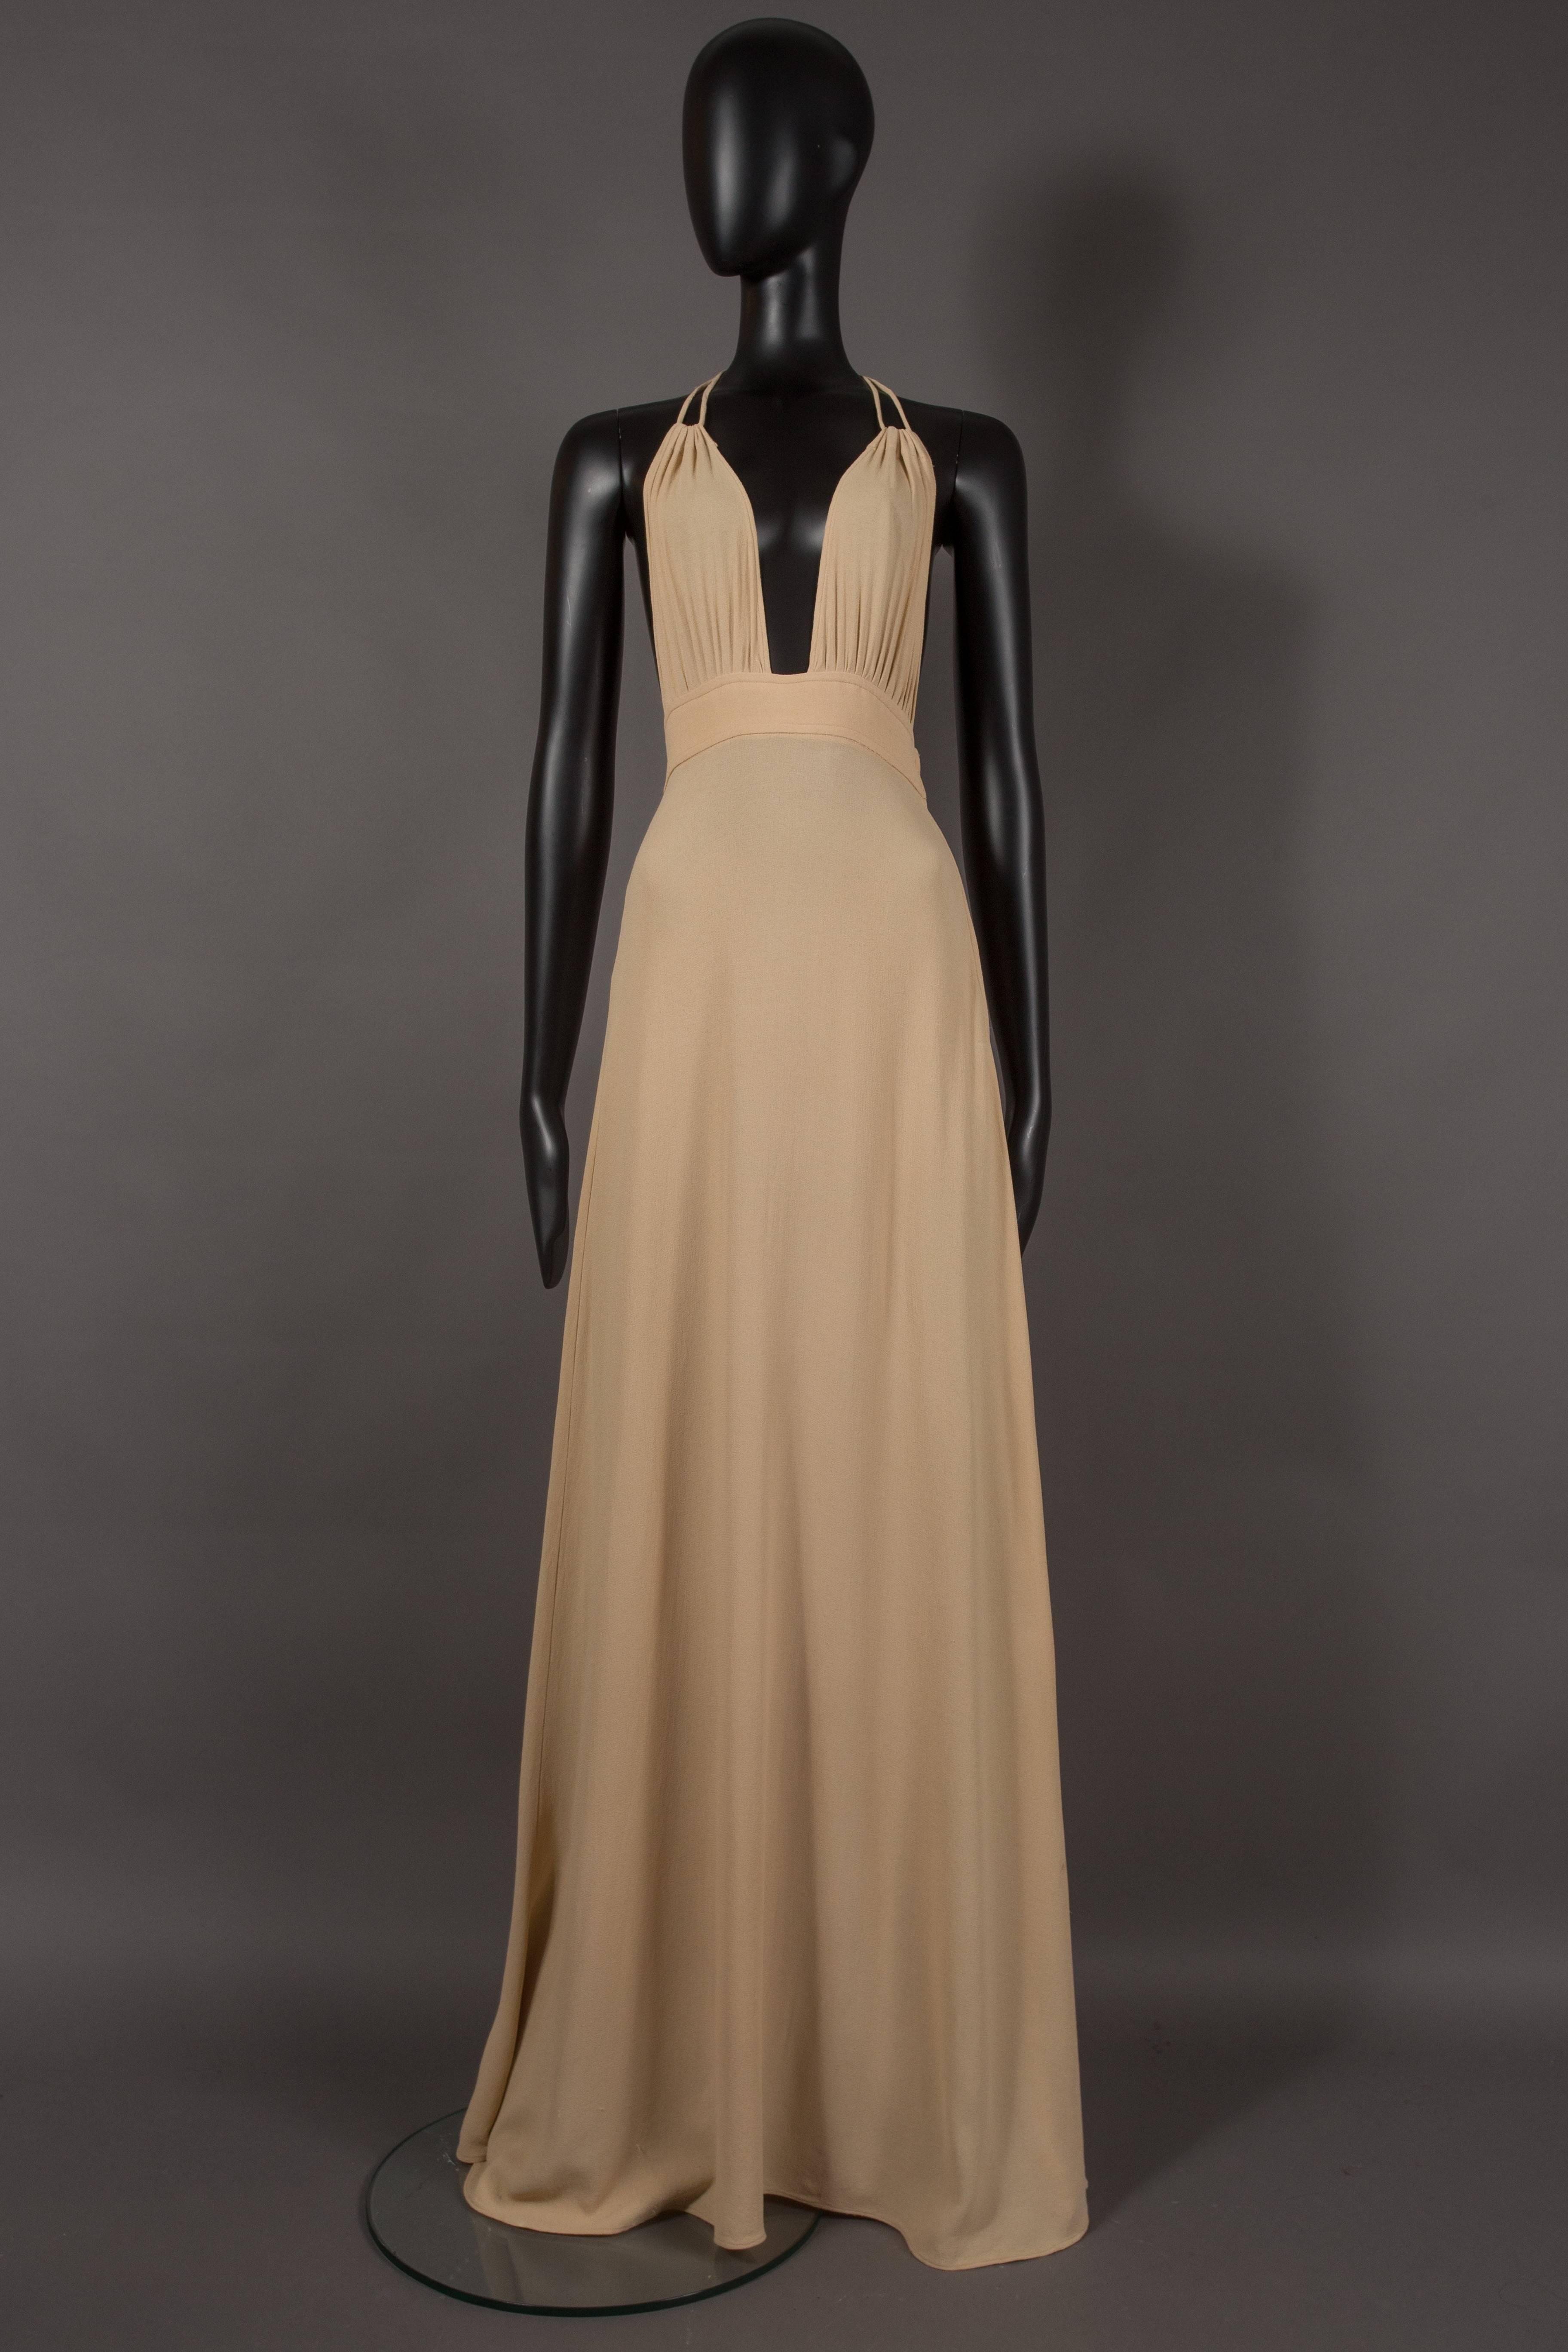 A rare Quorum champagne moss crepe evening dress, circa 1960s. Open back, metal zip closure, halter neck, drawstring pleated bust and full length flared skirt

Alice Pollock founded the Quorum boutique in 1964. In 1965 Ossie Clark started working